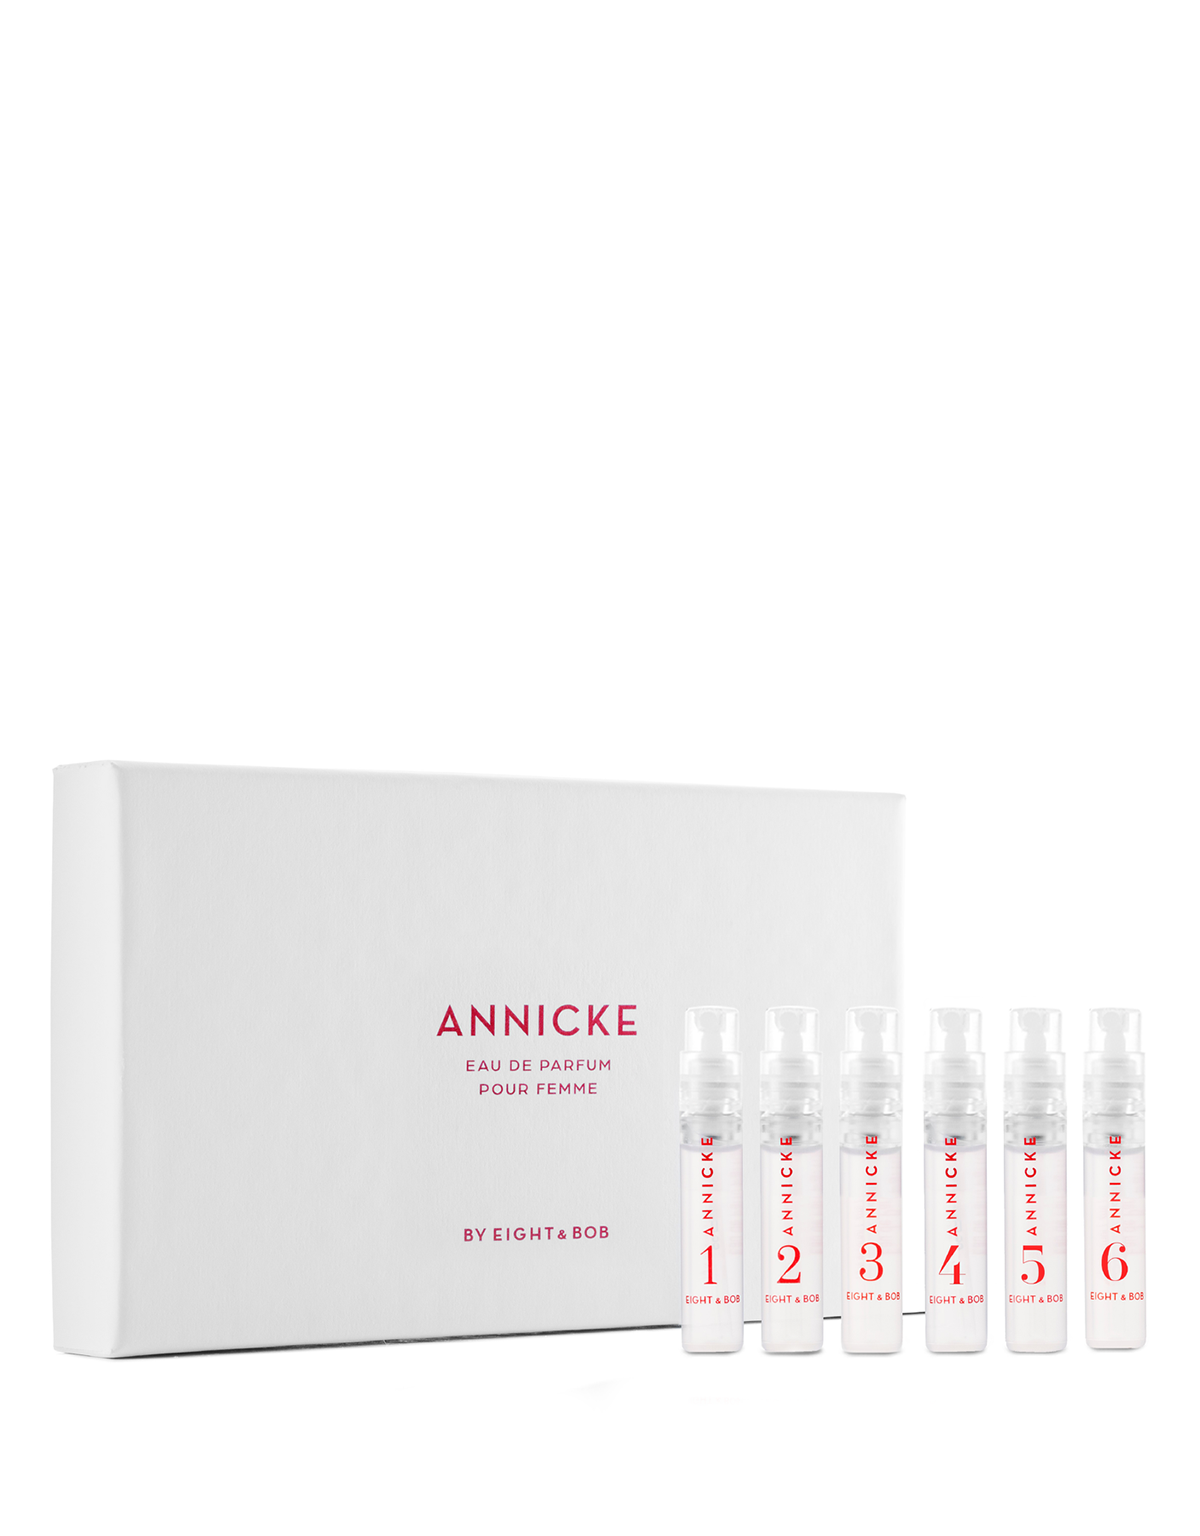 ANNICKE FRAGRANCE DISCOVERY SET – 6X2ML